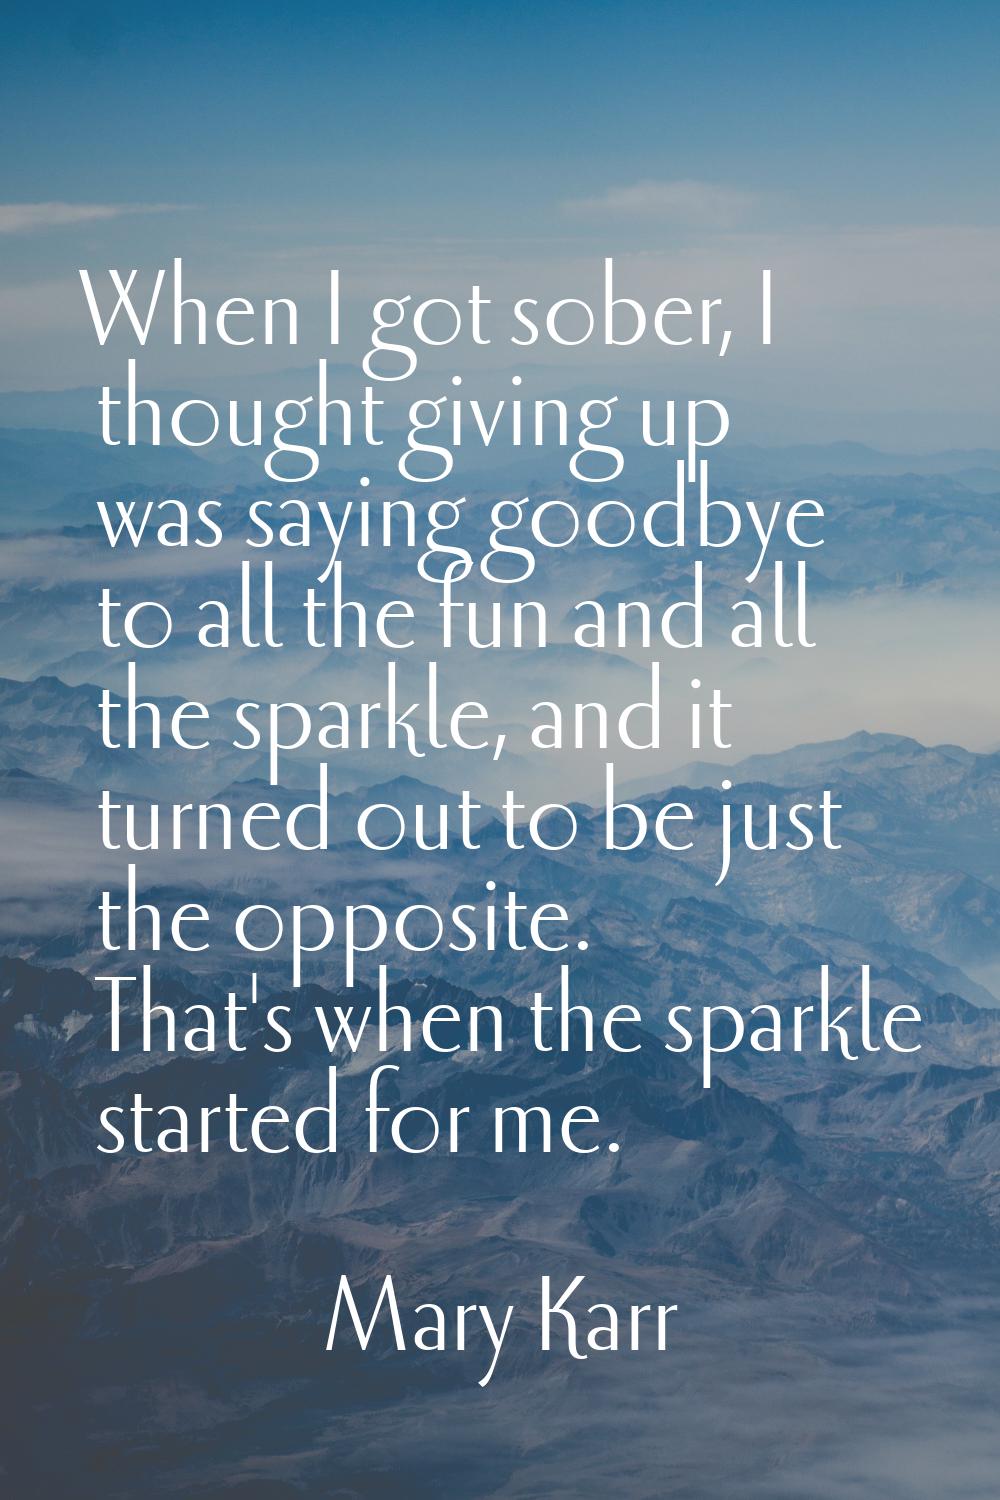 When I got sober, I thought giving up was saying goodbye to all the fun and all the sparkle, and it